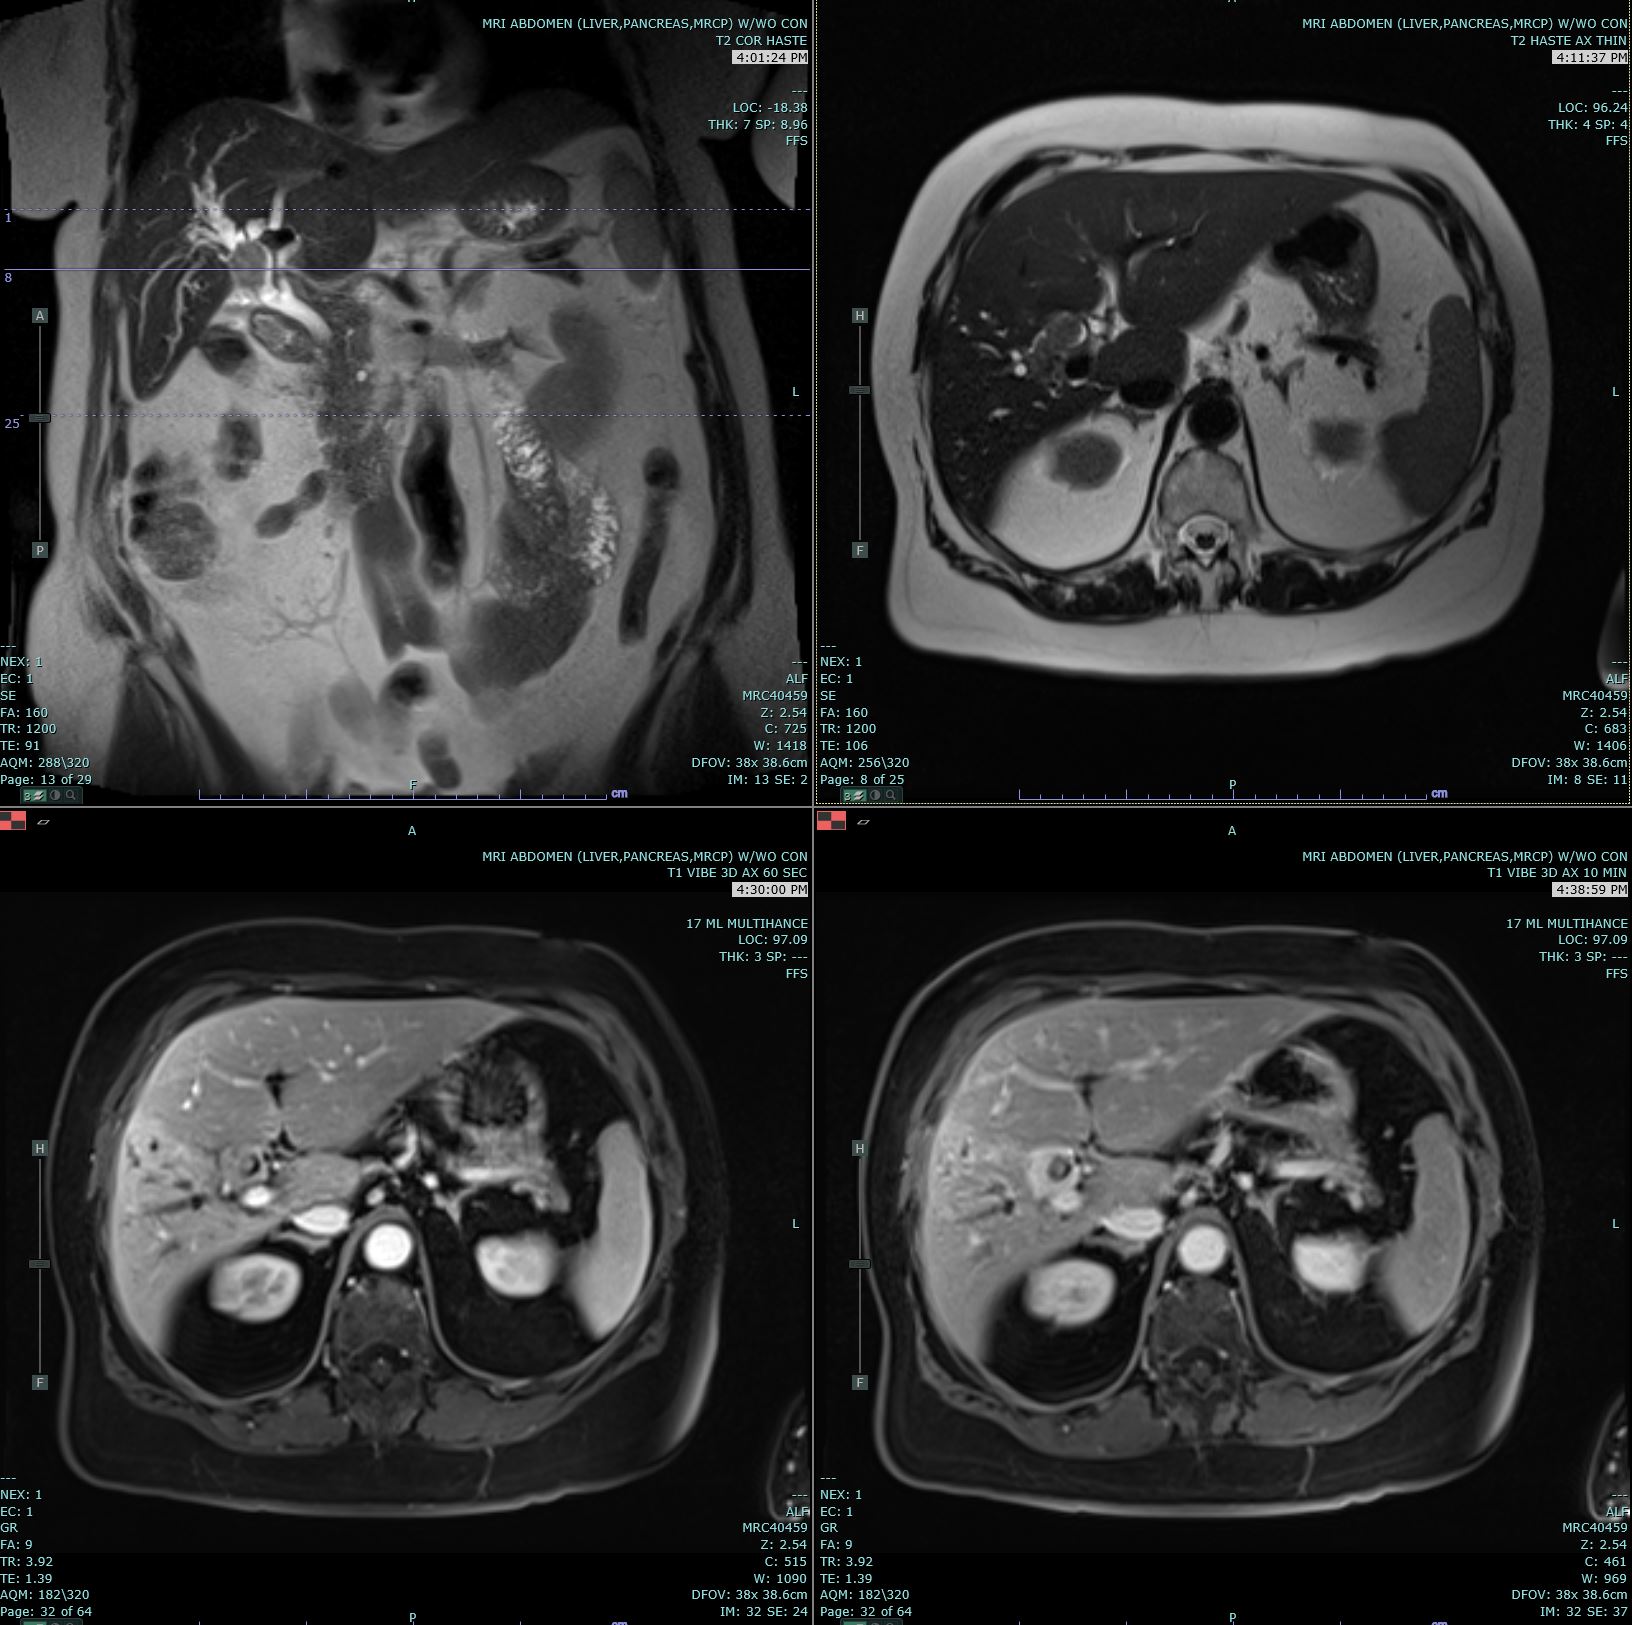 Coronal T2 Haste, Axial T2 Haste and 60 and 10 minute post contrast T1 Vibe images are submitted. There is a delayed enhancing hilar mass biopsy proven to be cholangiocarcinoma. This mass has increased T2 signal in comparison to the background liver parenchyma. 